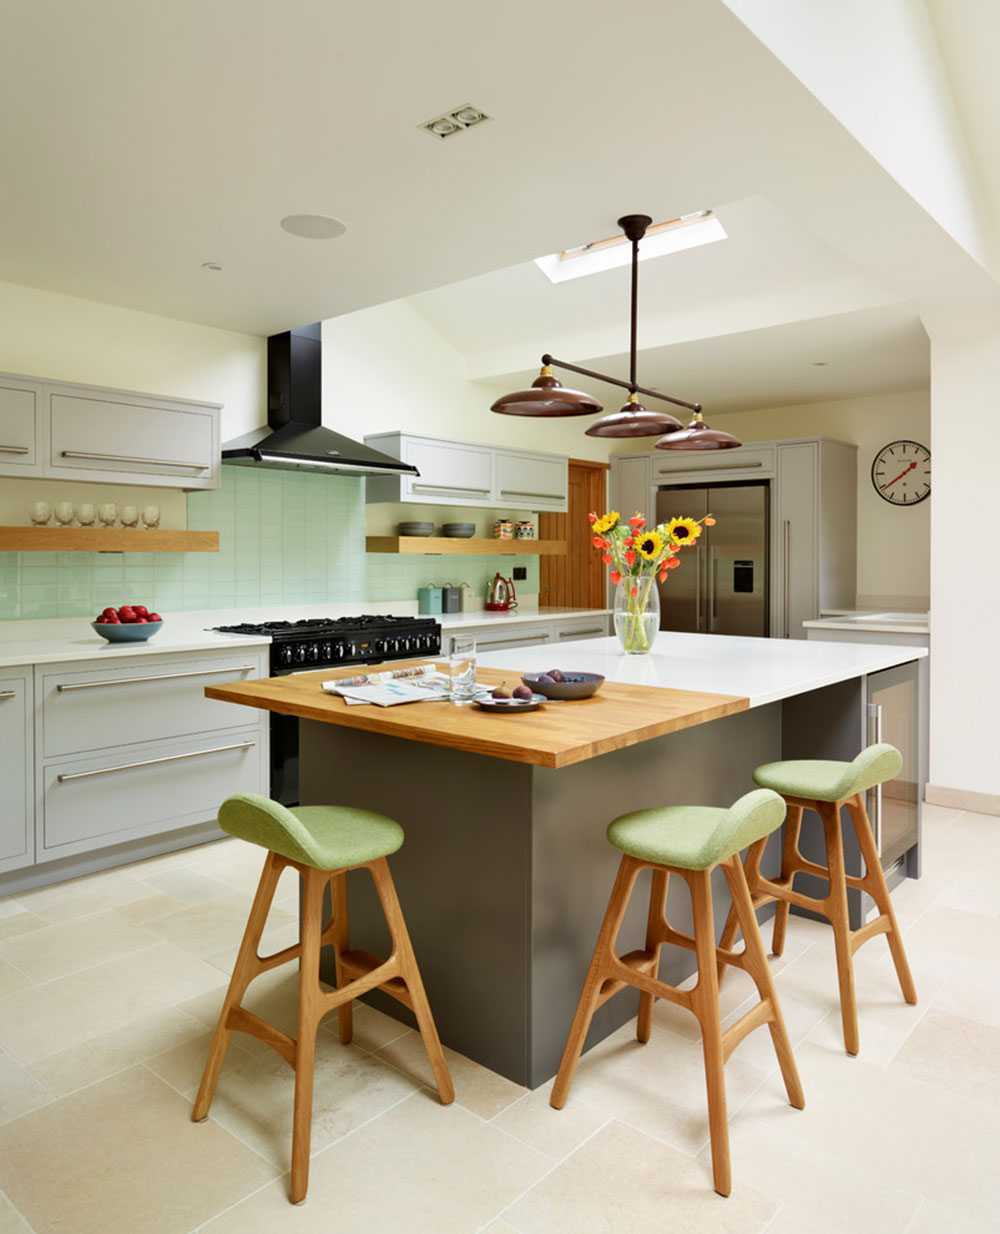 18 Remarkable Kitchen Islands With Seating Place That